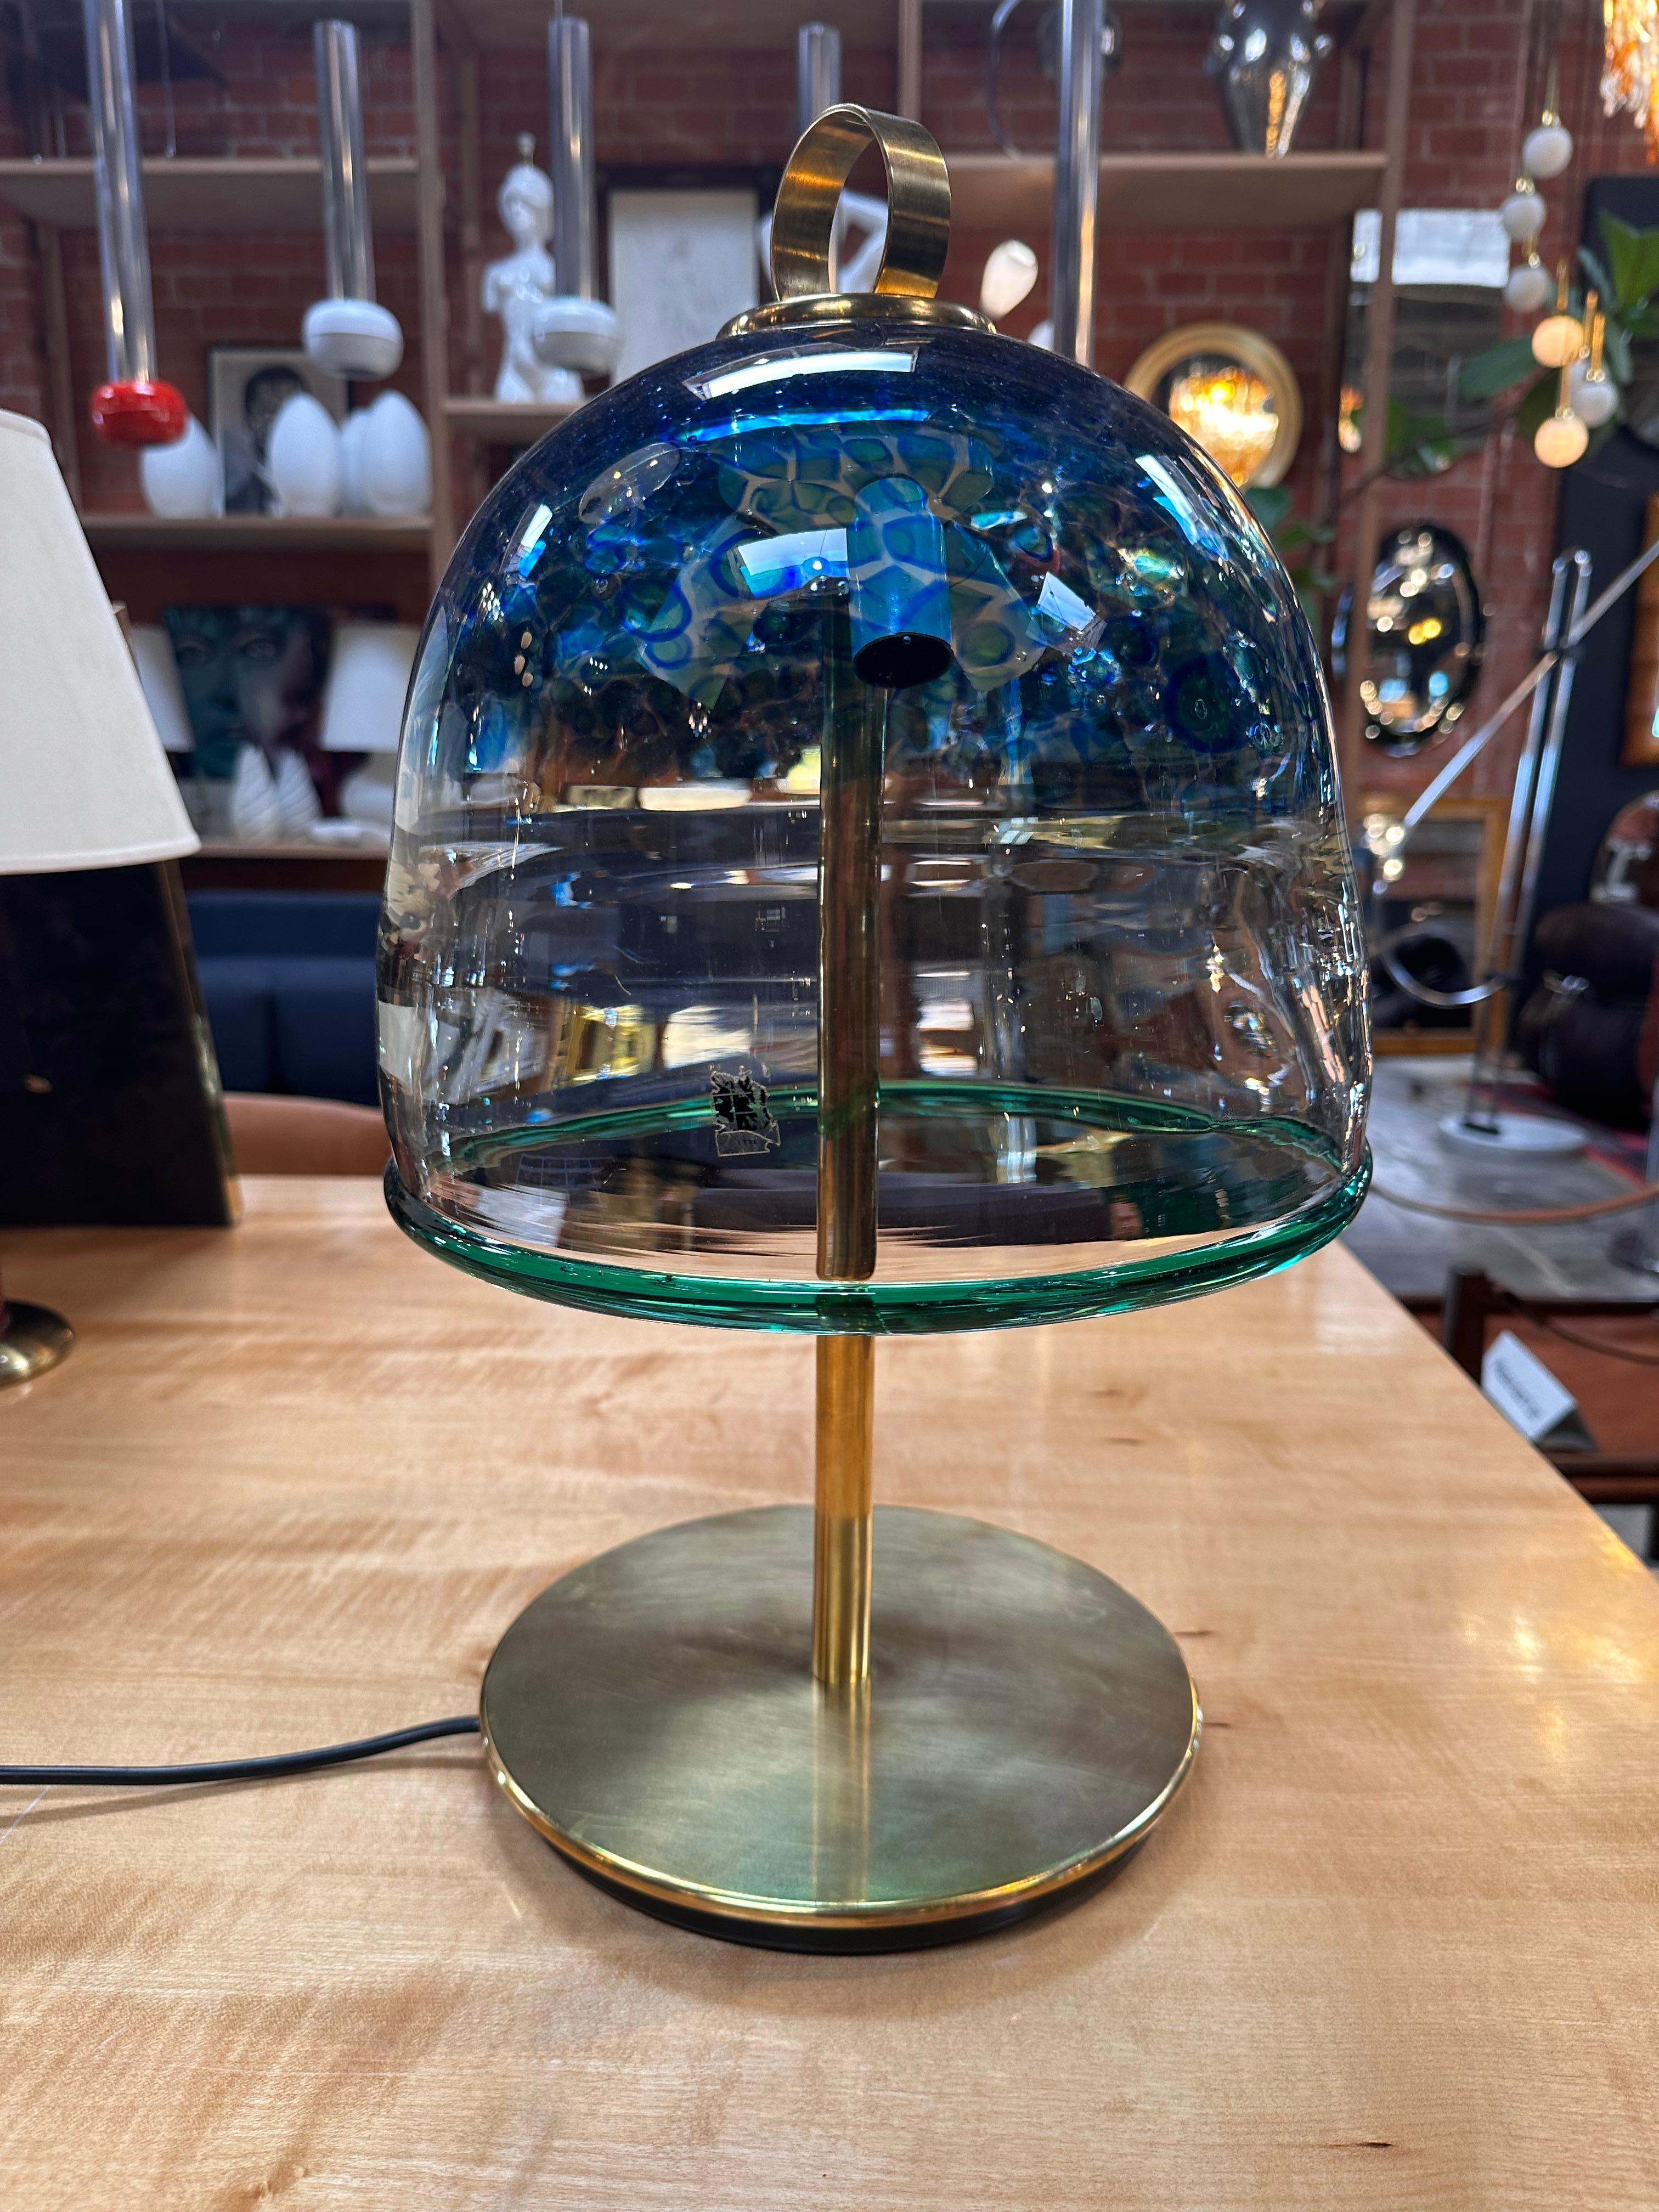 A Mid-Century Italian Murano Table Lamp from the 1960s features a distinctive design with a brass base and a uniquely styled fully blue Murano shade. This lamp encapsulates the elegance and innovation of mid-century Italian craftsmanship, making it